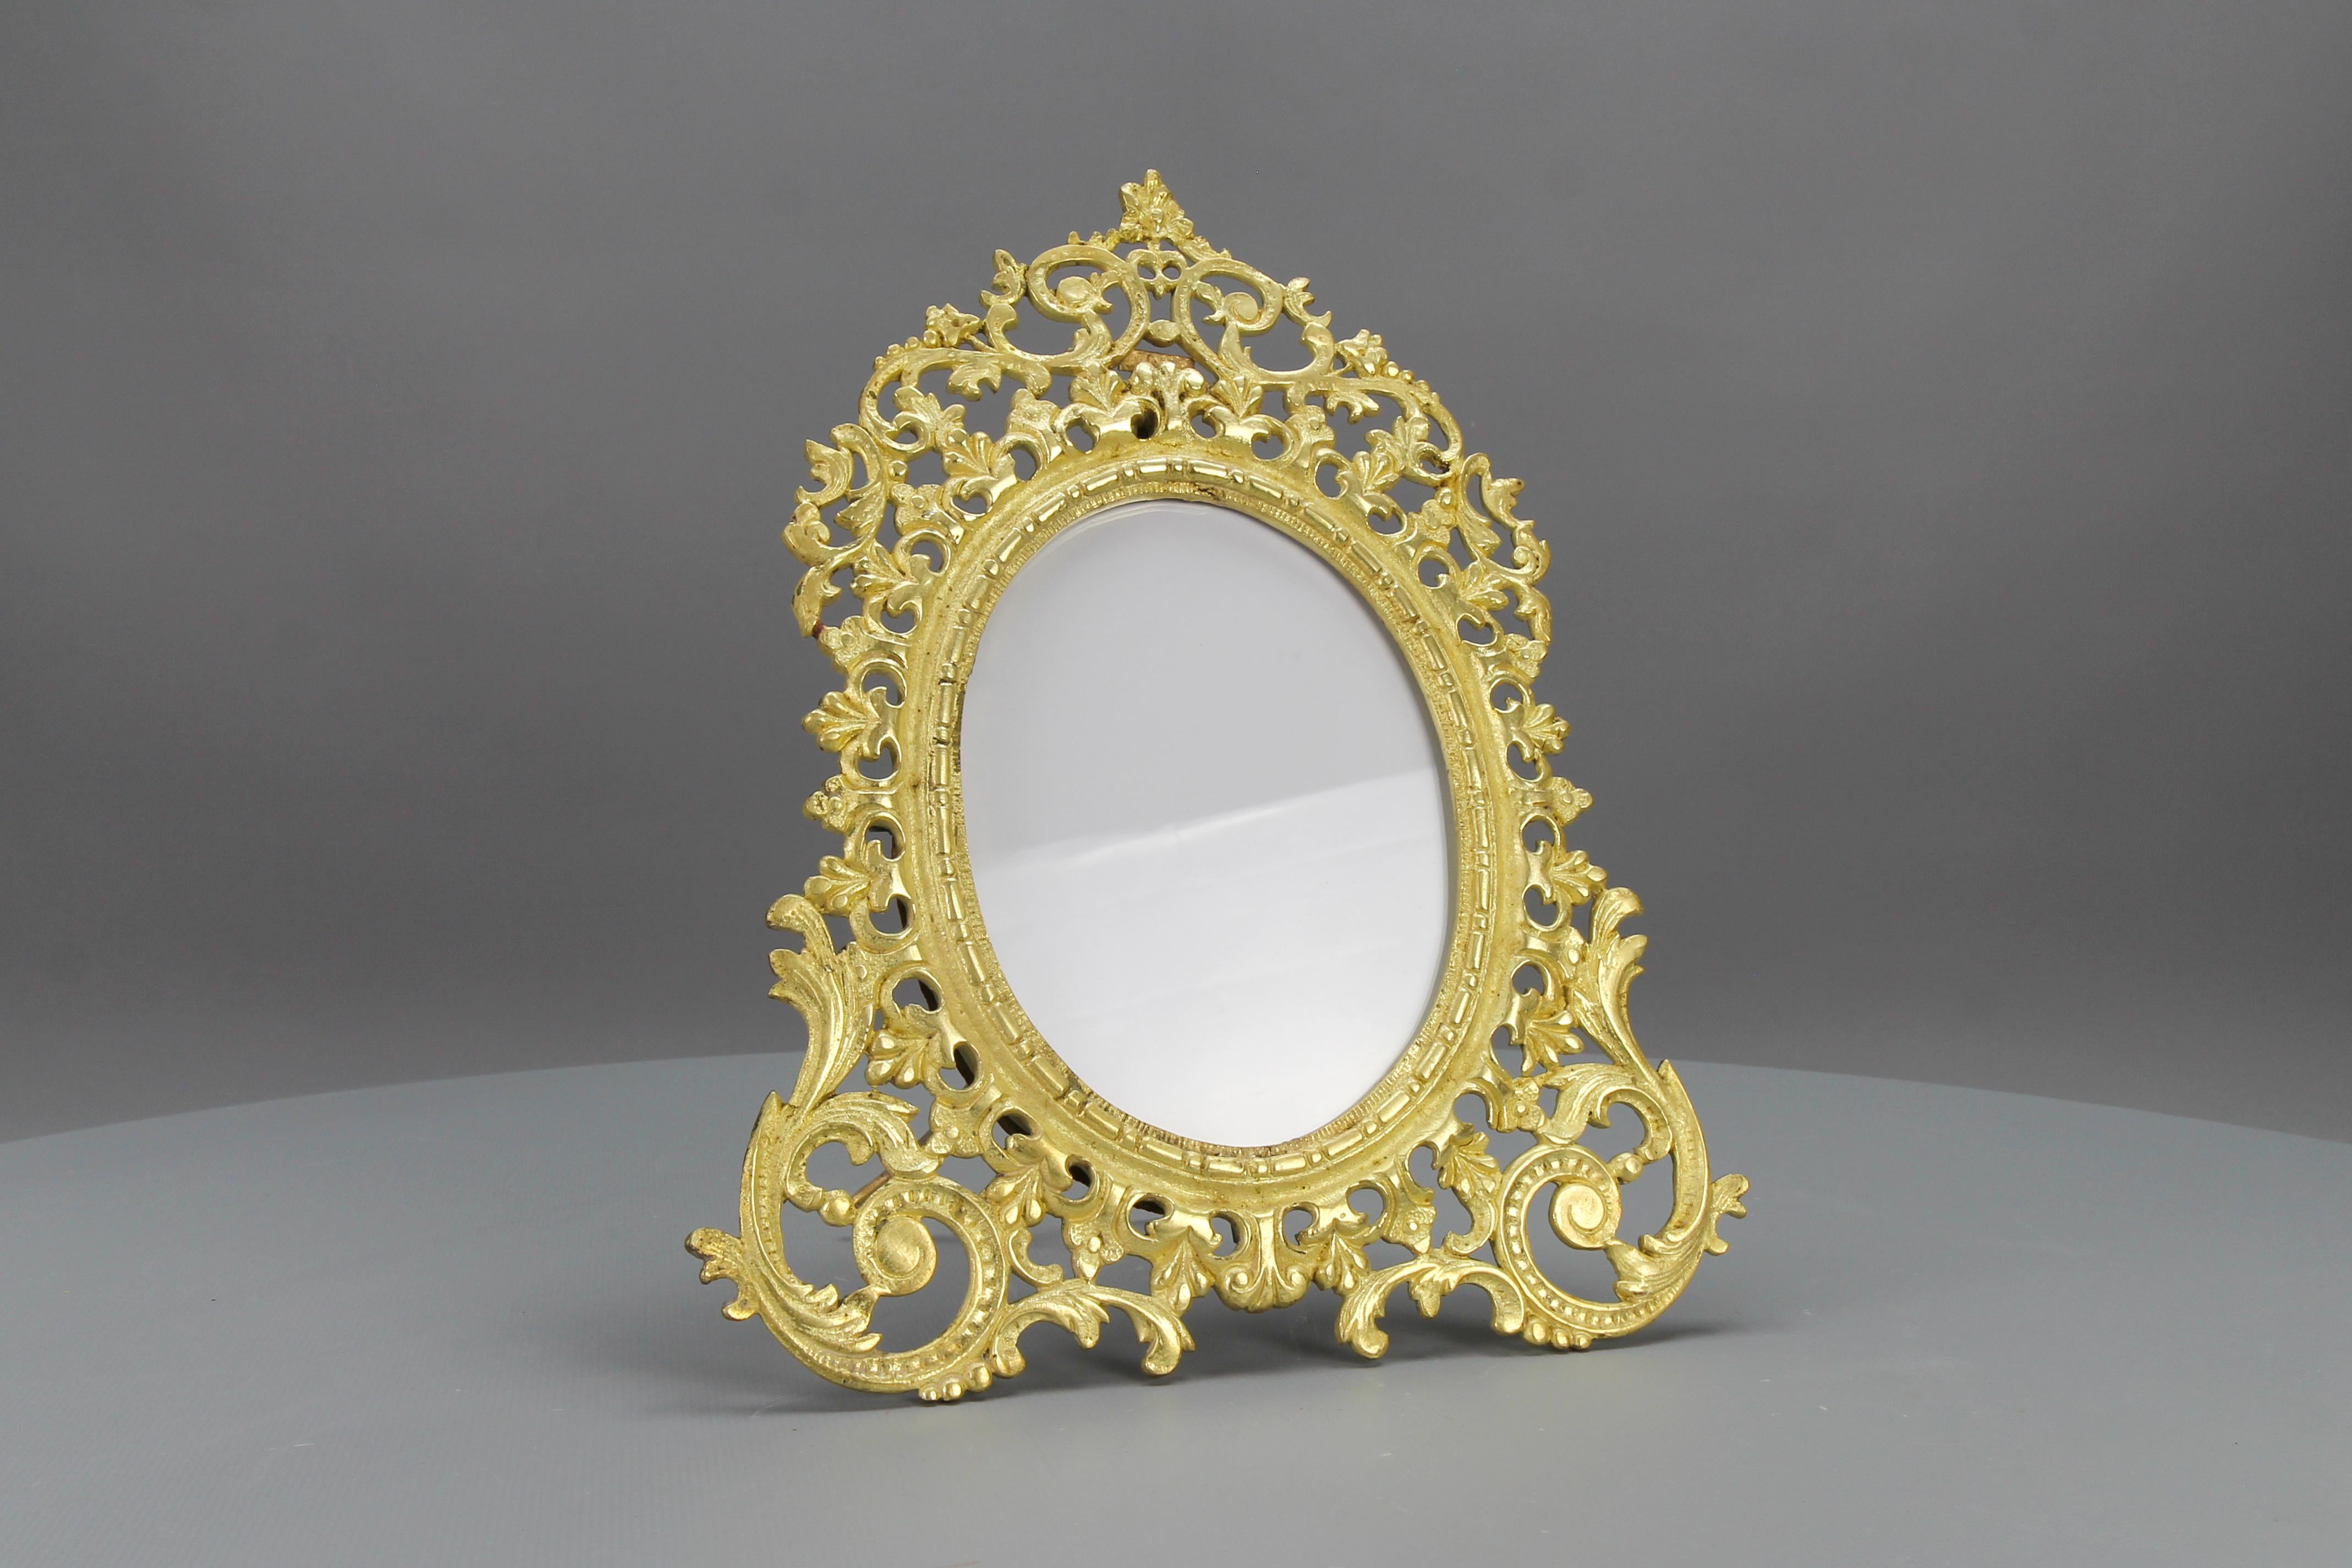 French Bronze Neoclassical Style Round Desktop Picture Frame from circa the 1890s.
This beautiful ornate oval frame is made of bronze and has a supporting leg on the back. Decorated with typical Neoclassical or Louis XVI-style foliate motifs around